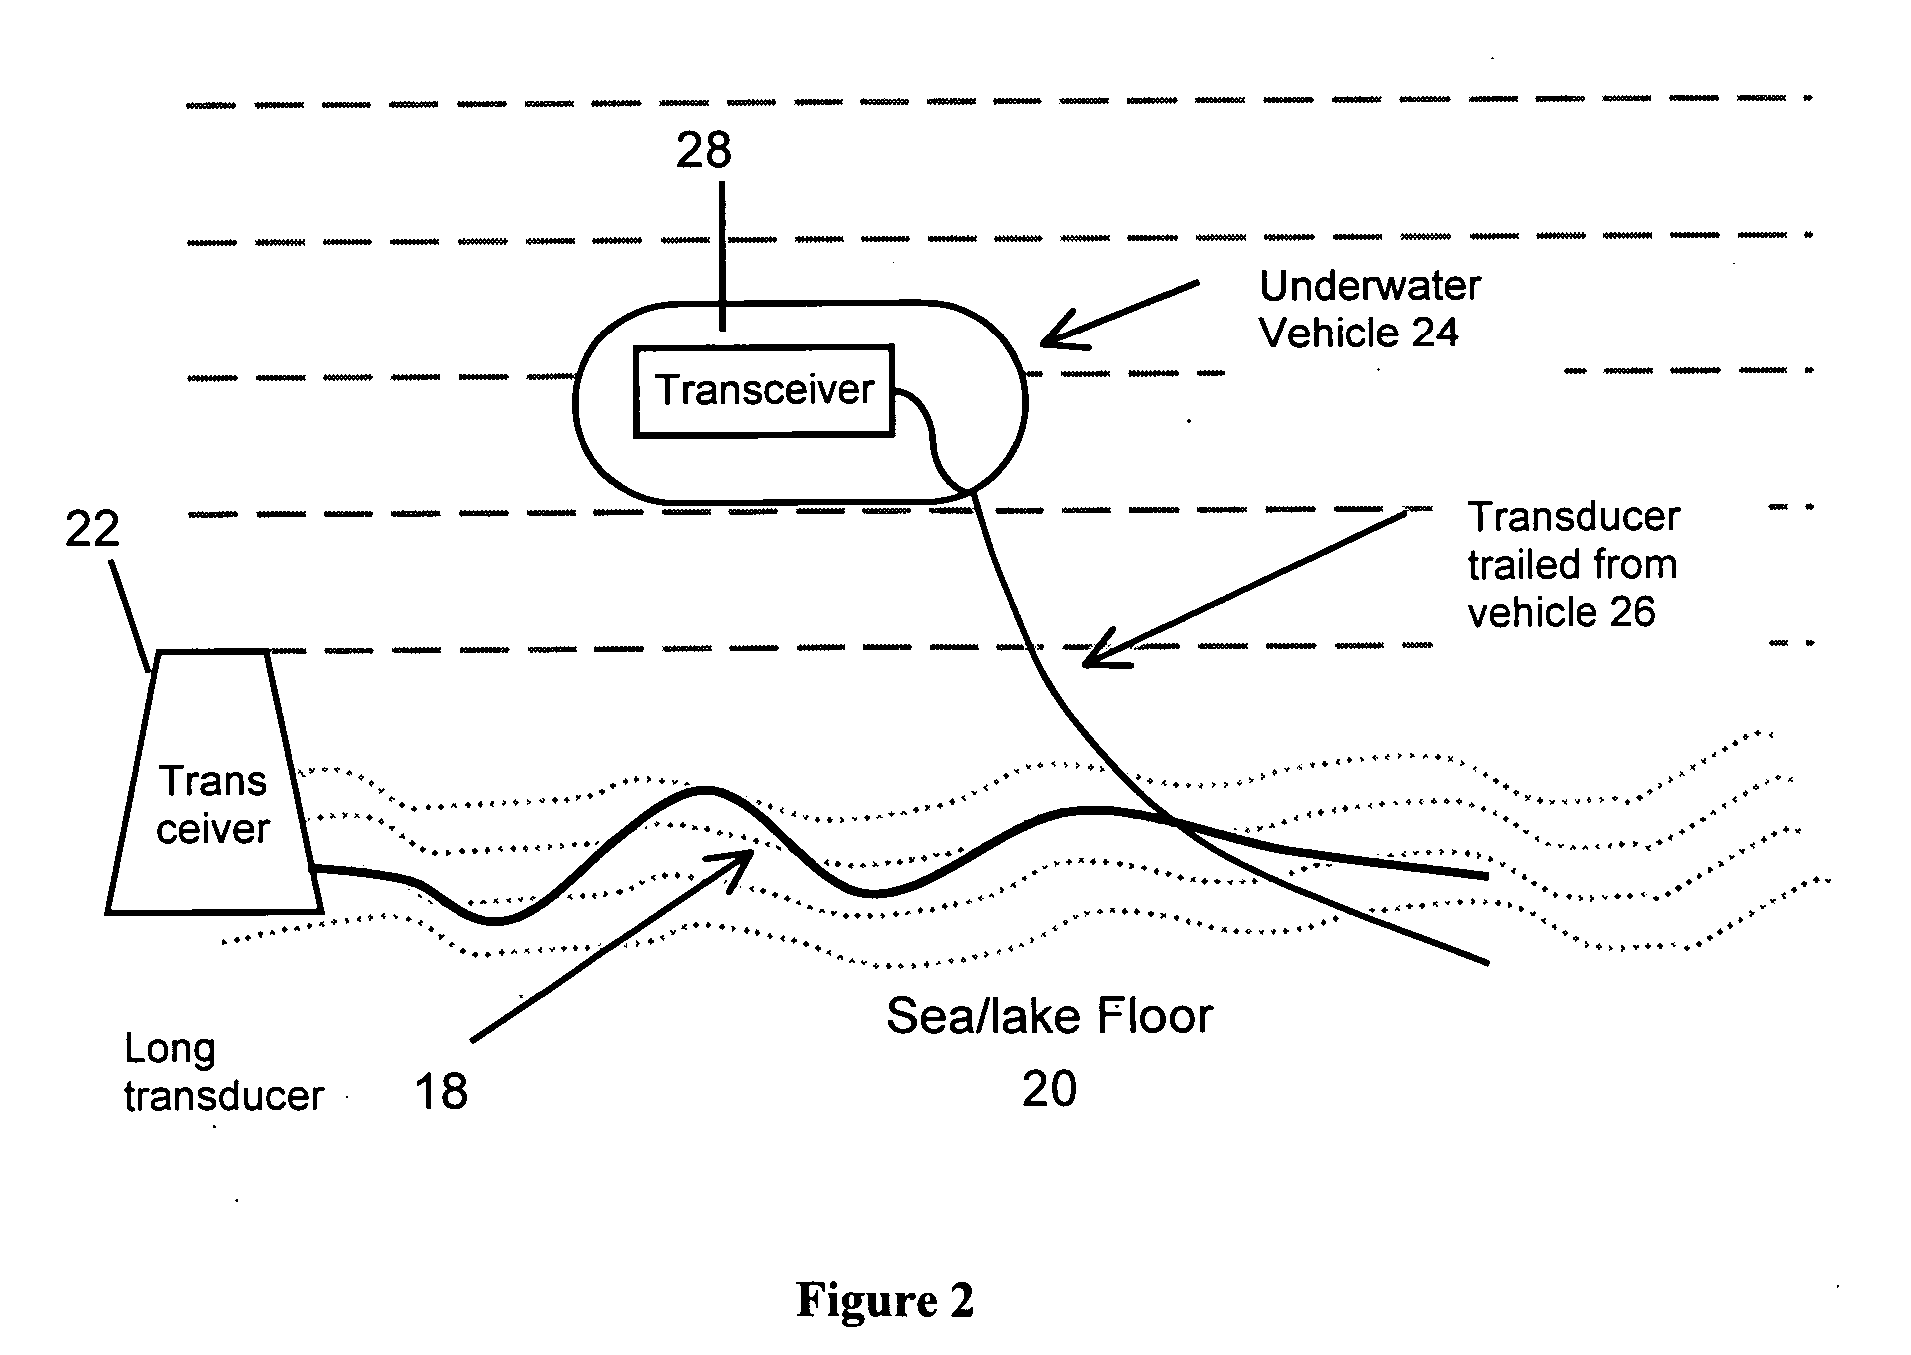 Distributed underwater electromagnetic communication system